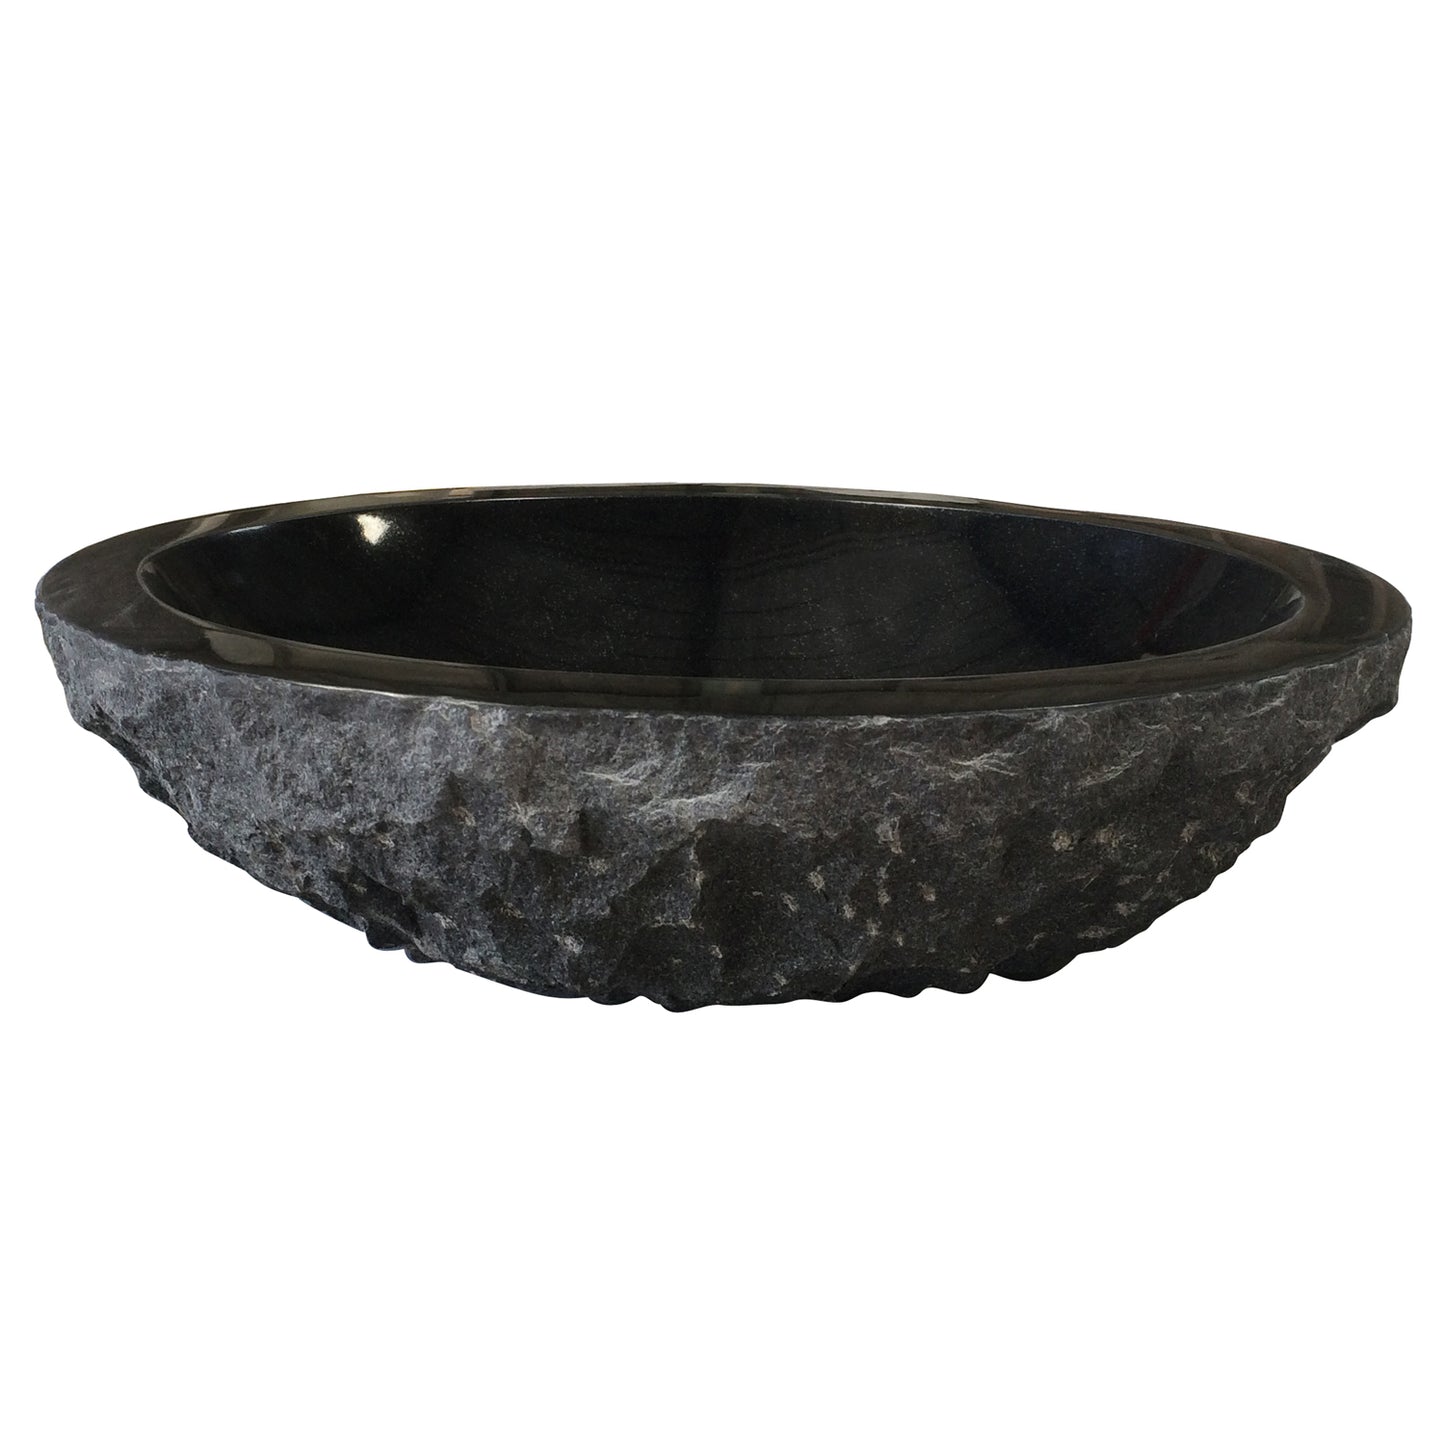 Hubbard Black Granite 18" x 14" Oval Vessel Sink with Chiseled Exterior